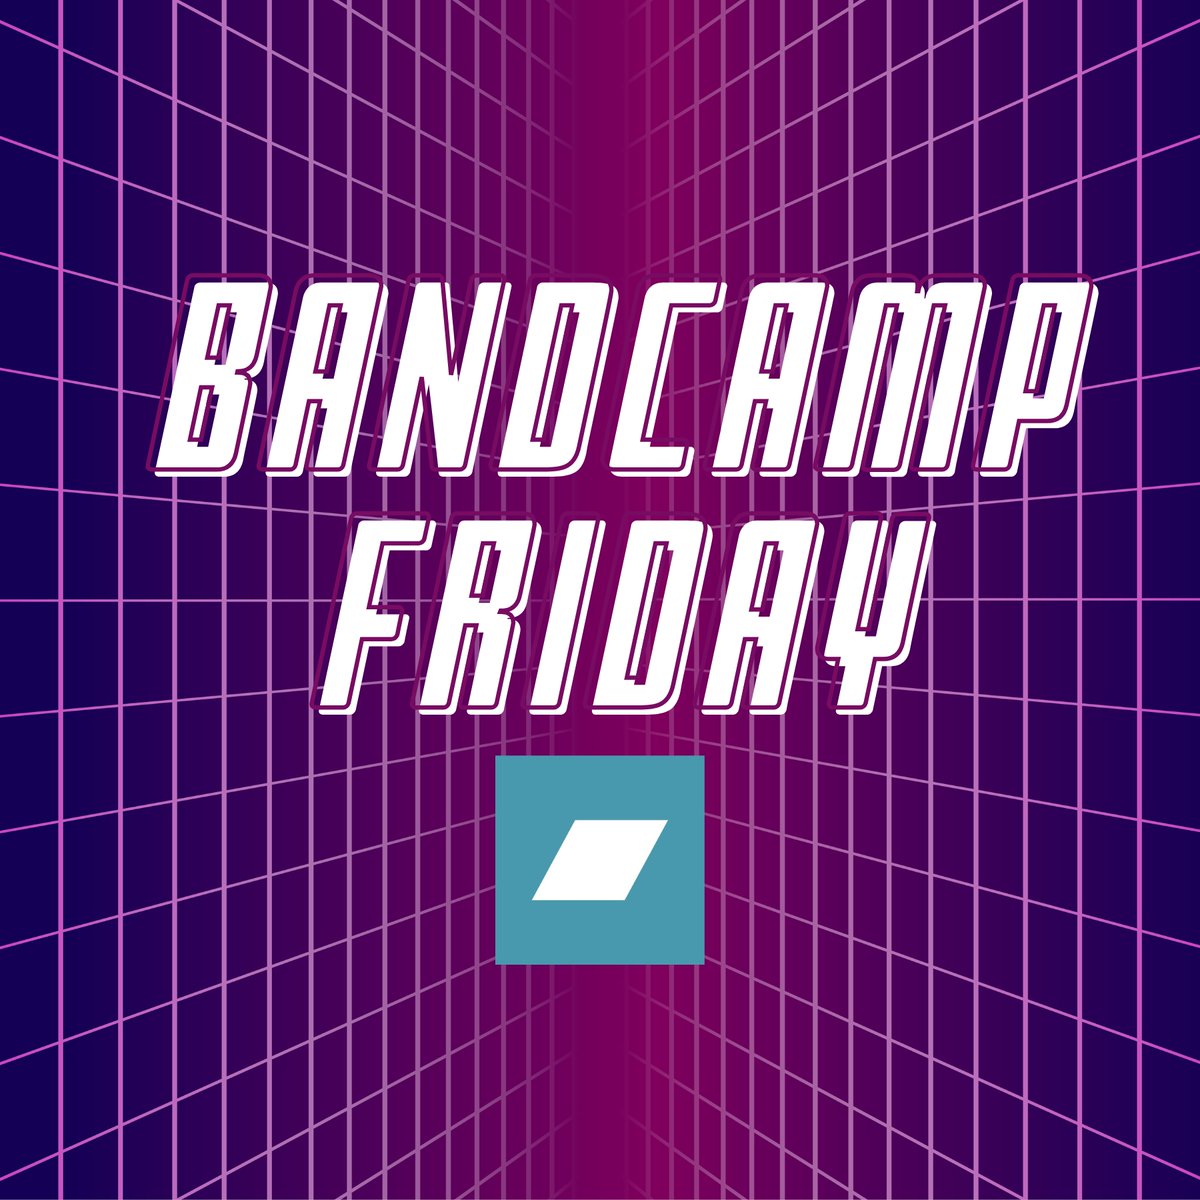 Artists, post your links below! 

#BandcampFriday #Bandcamp #Synthfam